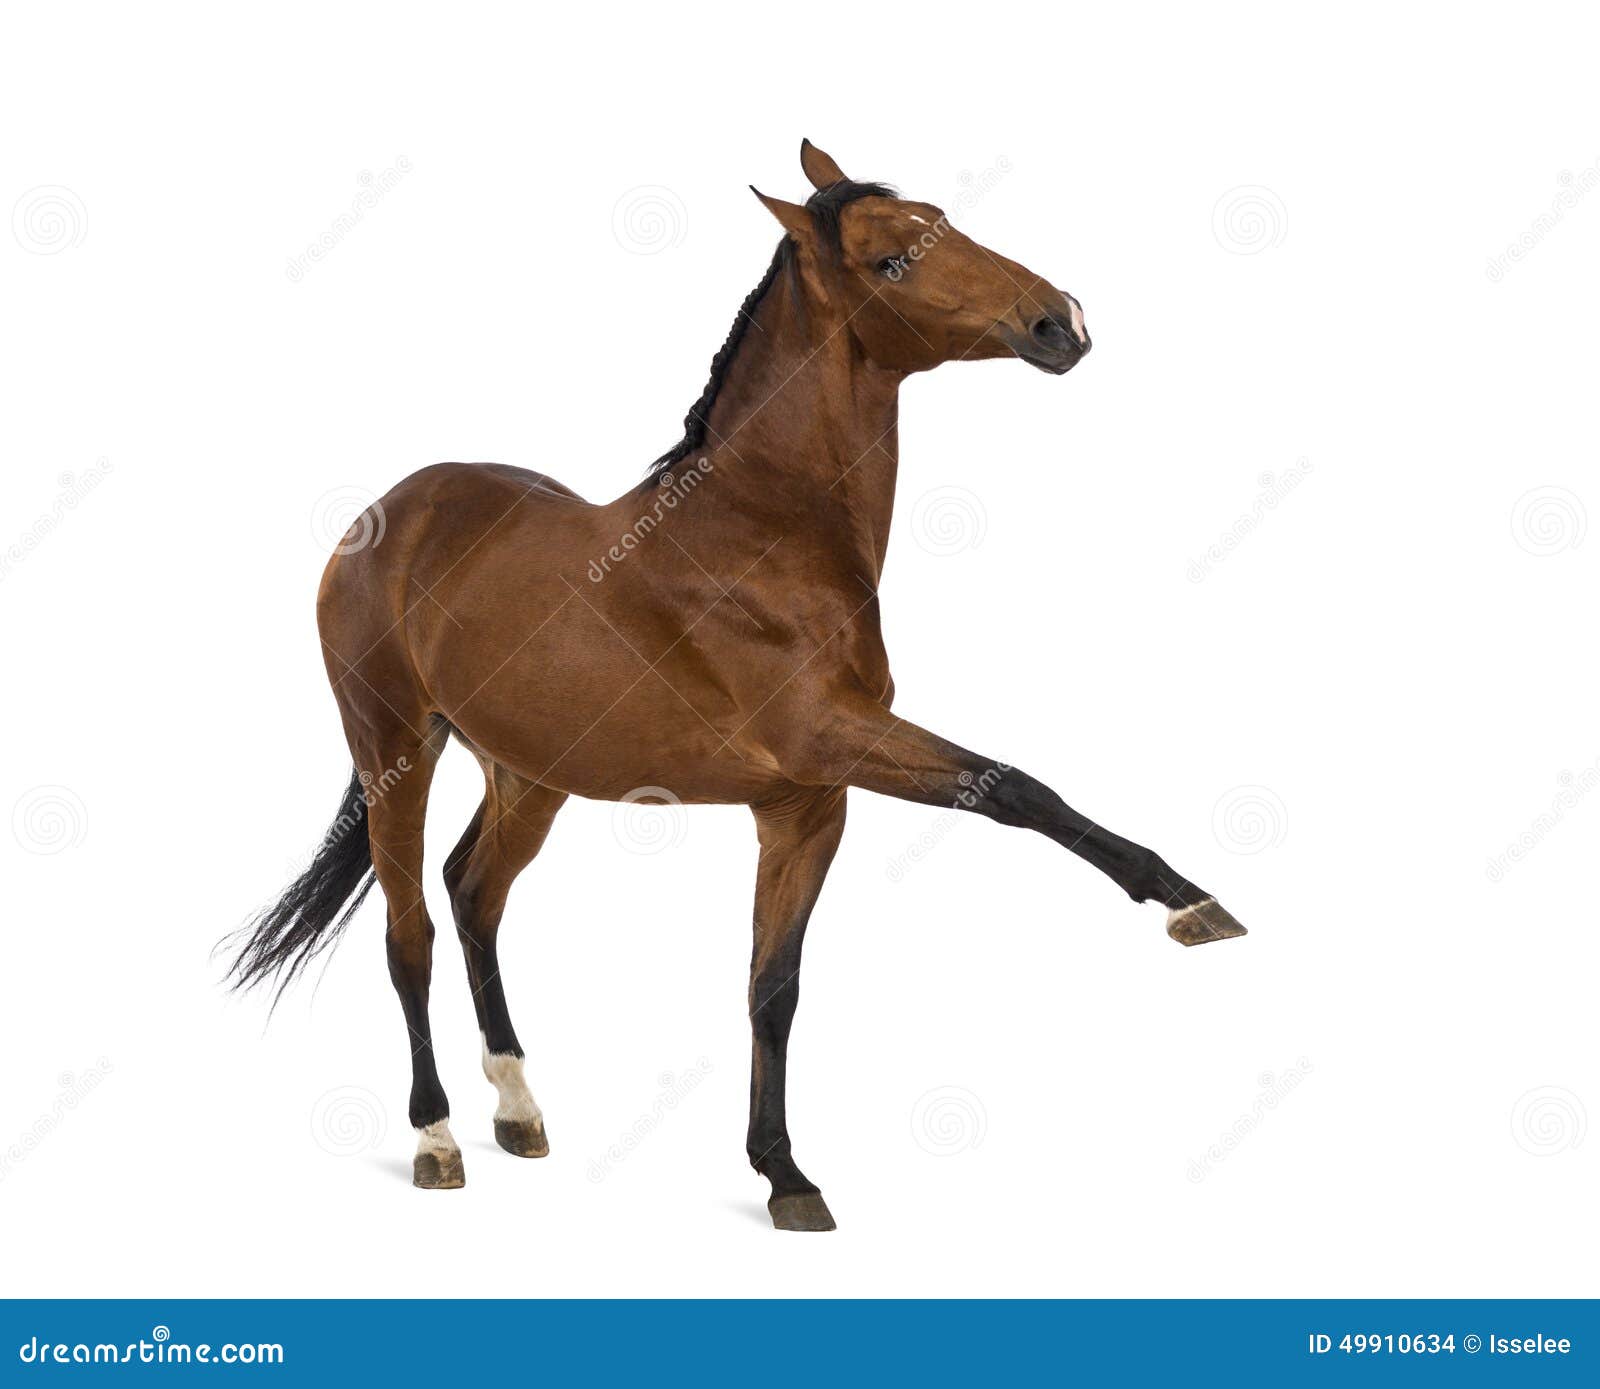 andalusian horse with a leg up